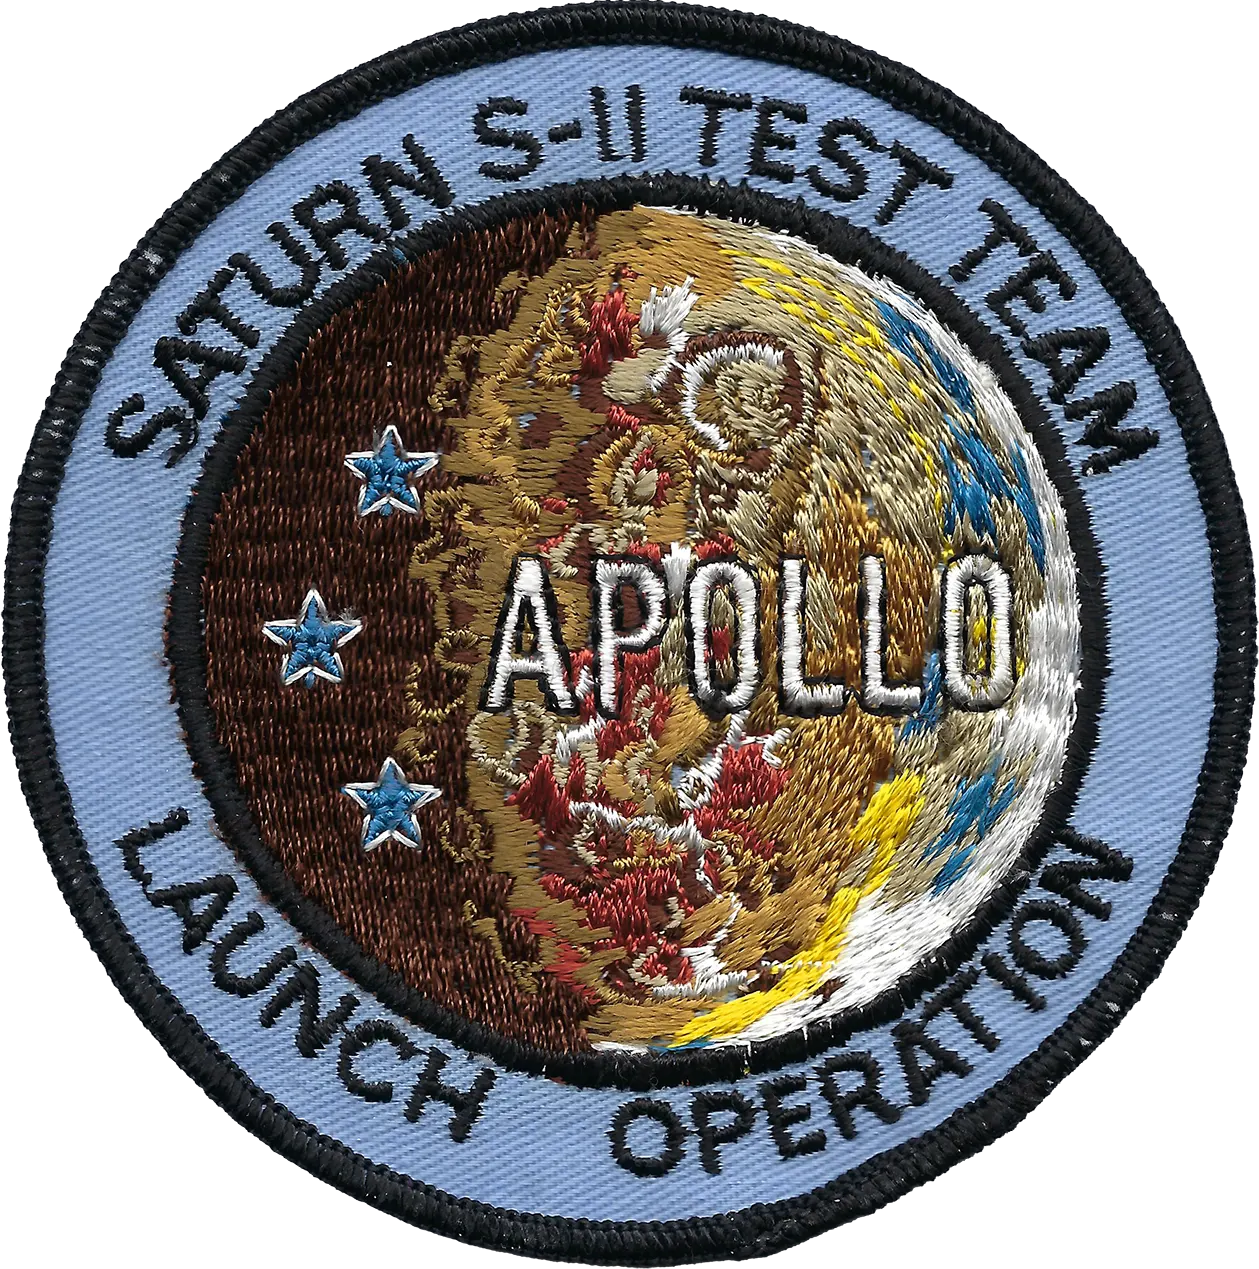 Saturn Iron On Sew On Embroidered Patch 2.5" in Diameter Space 